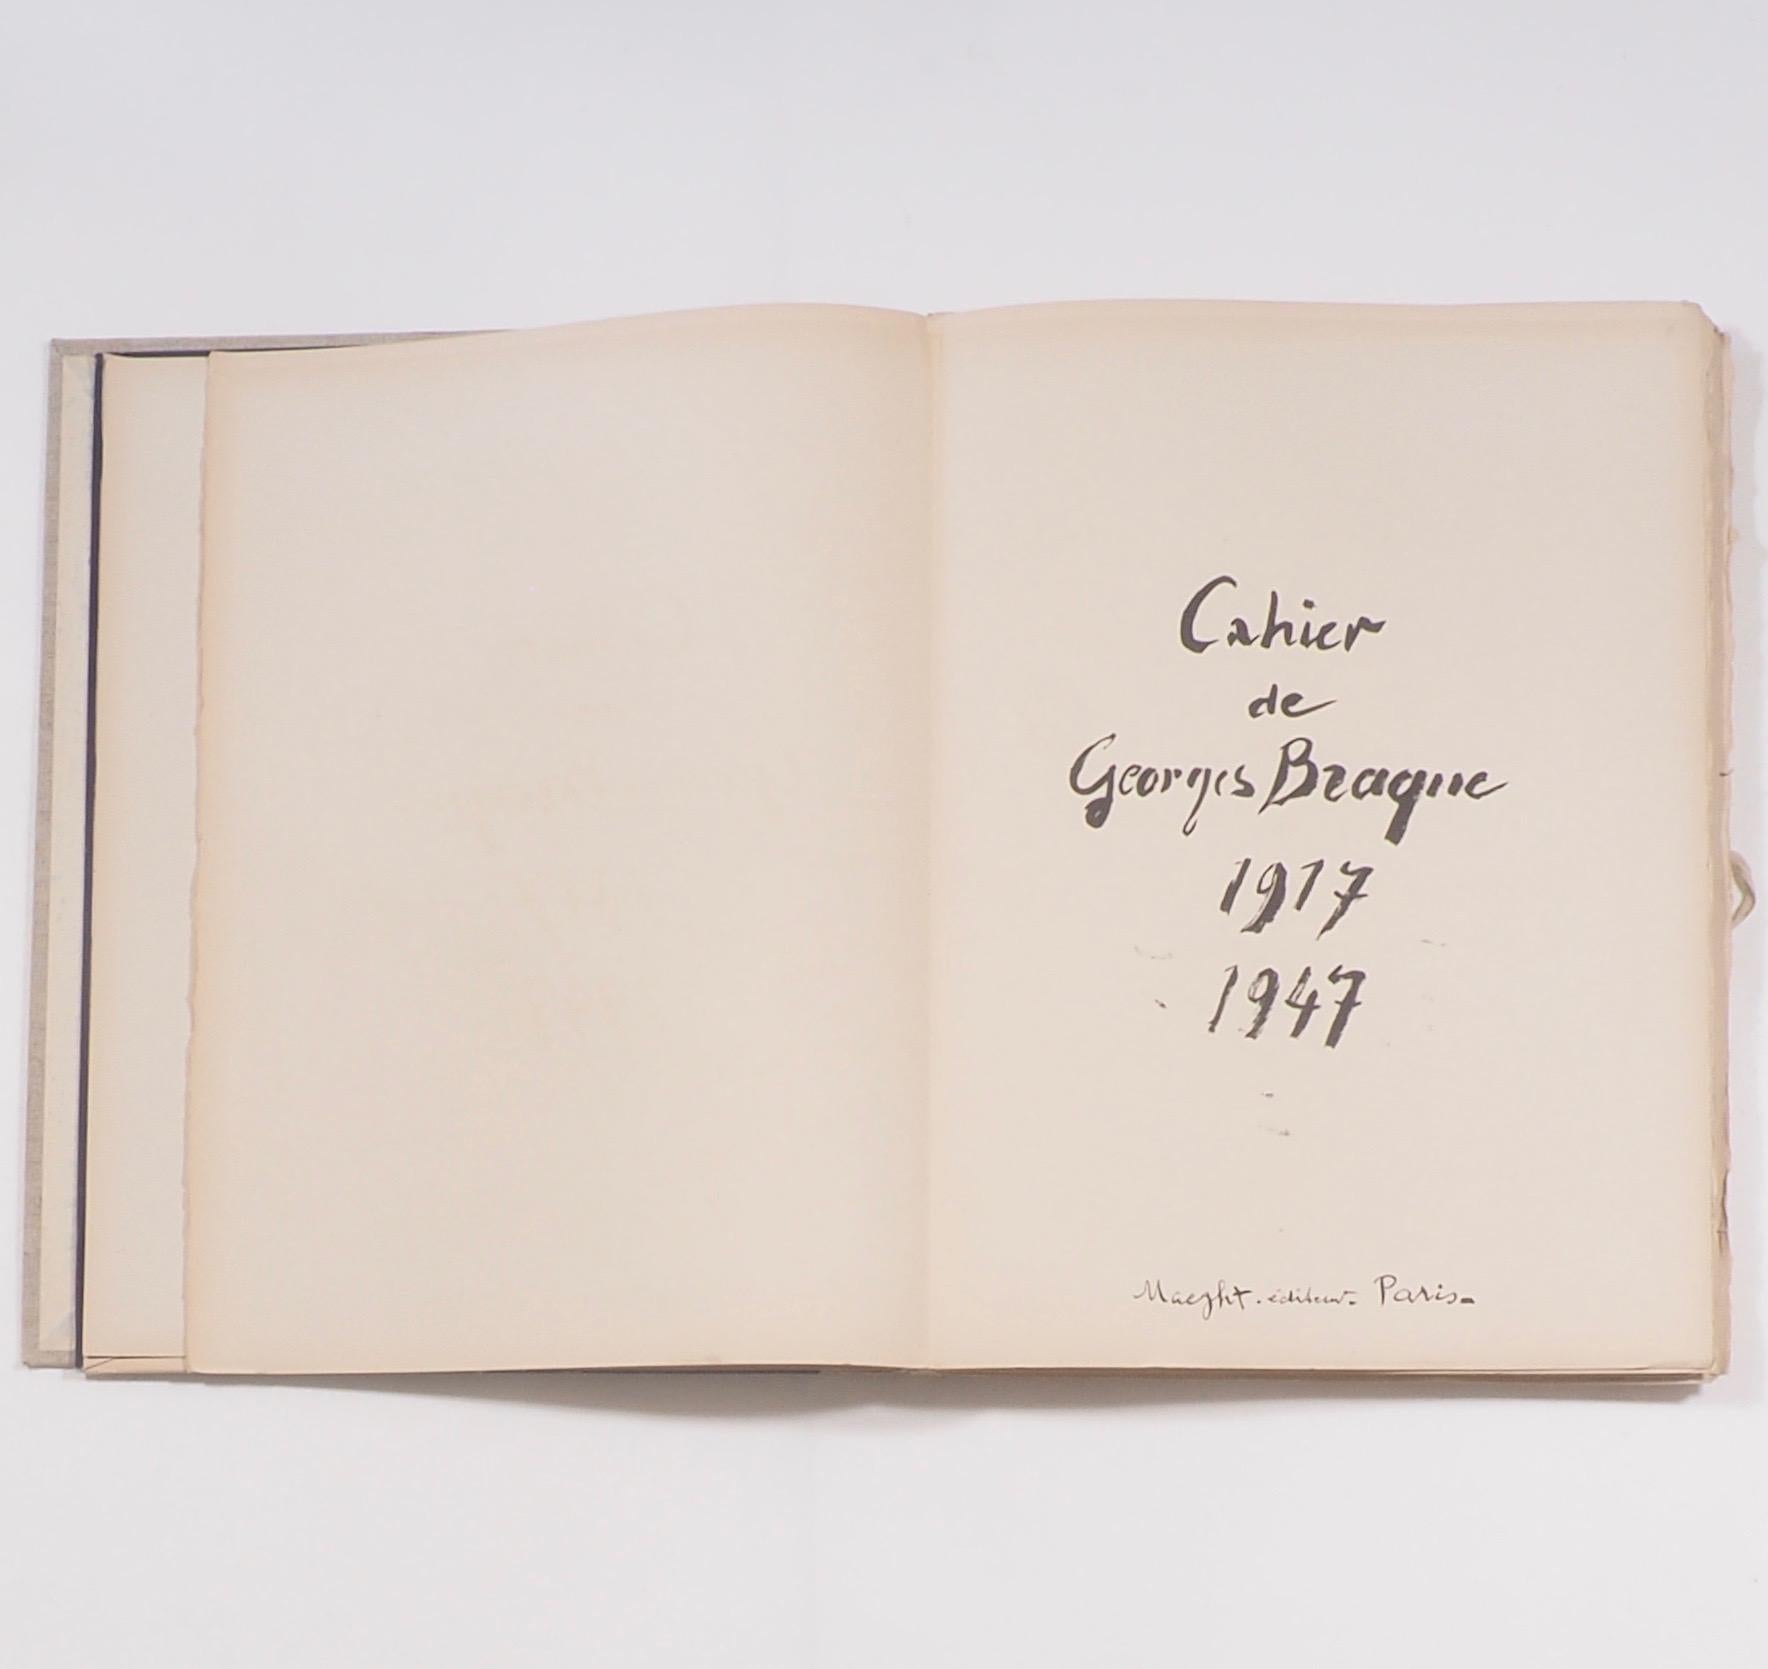 Cahier de Georges Braque 1917-1955.  
Published by Paris: Maeght Éditeur First Edition 1956. Printed by Fernand Mourlot.

A simply beautiful portfolio, overseen and designed entirely by the artist and rare to find in such excellent condition.In